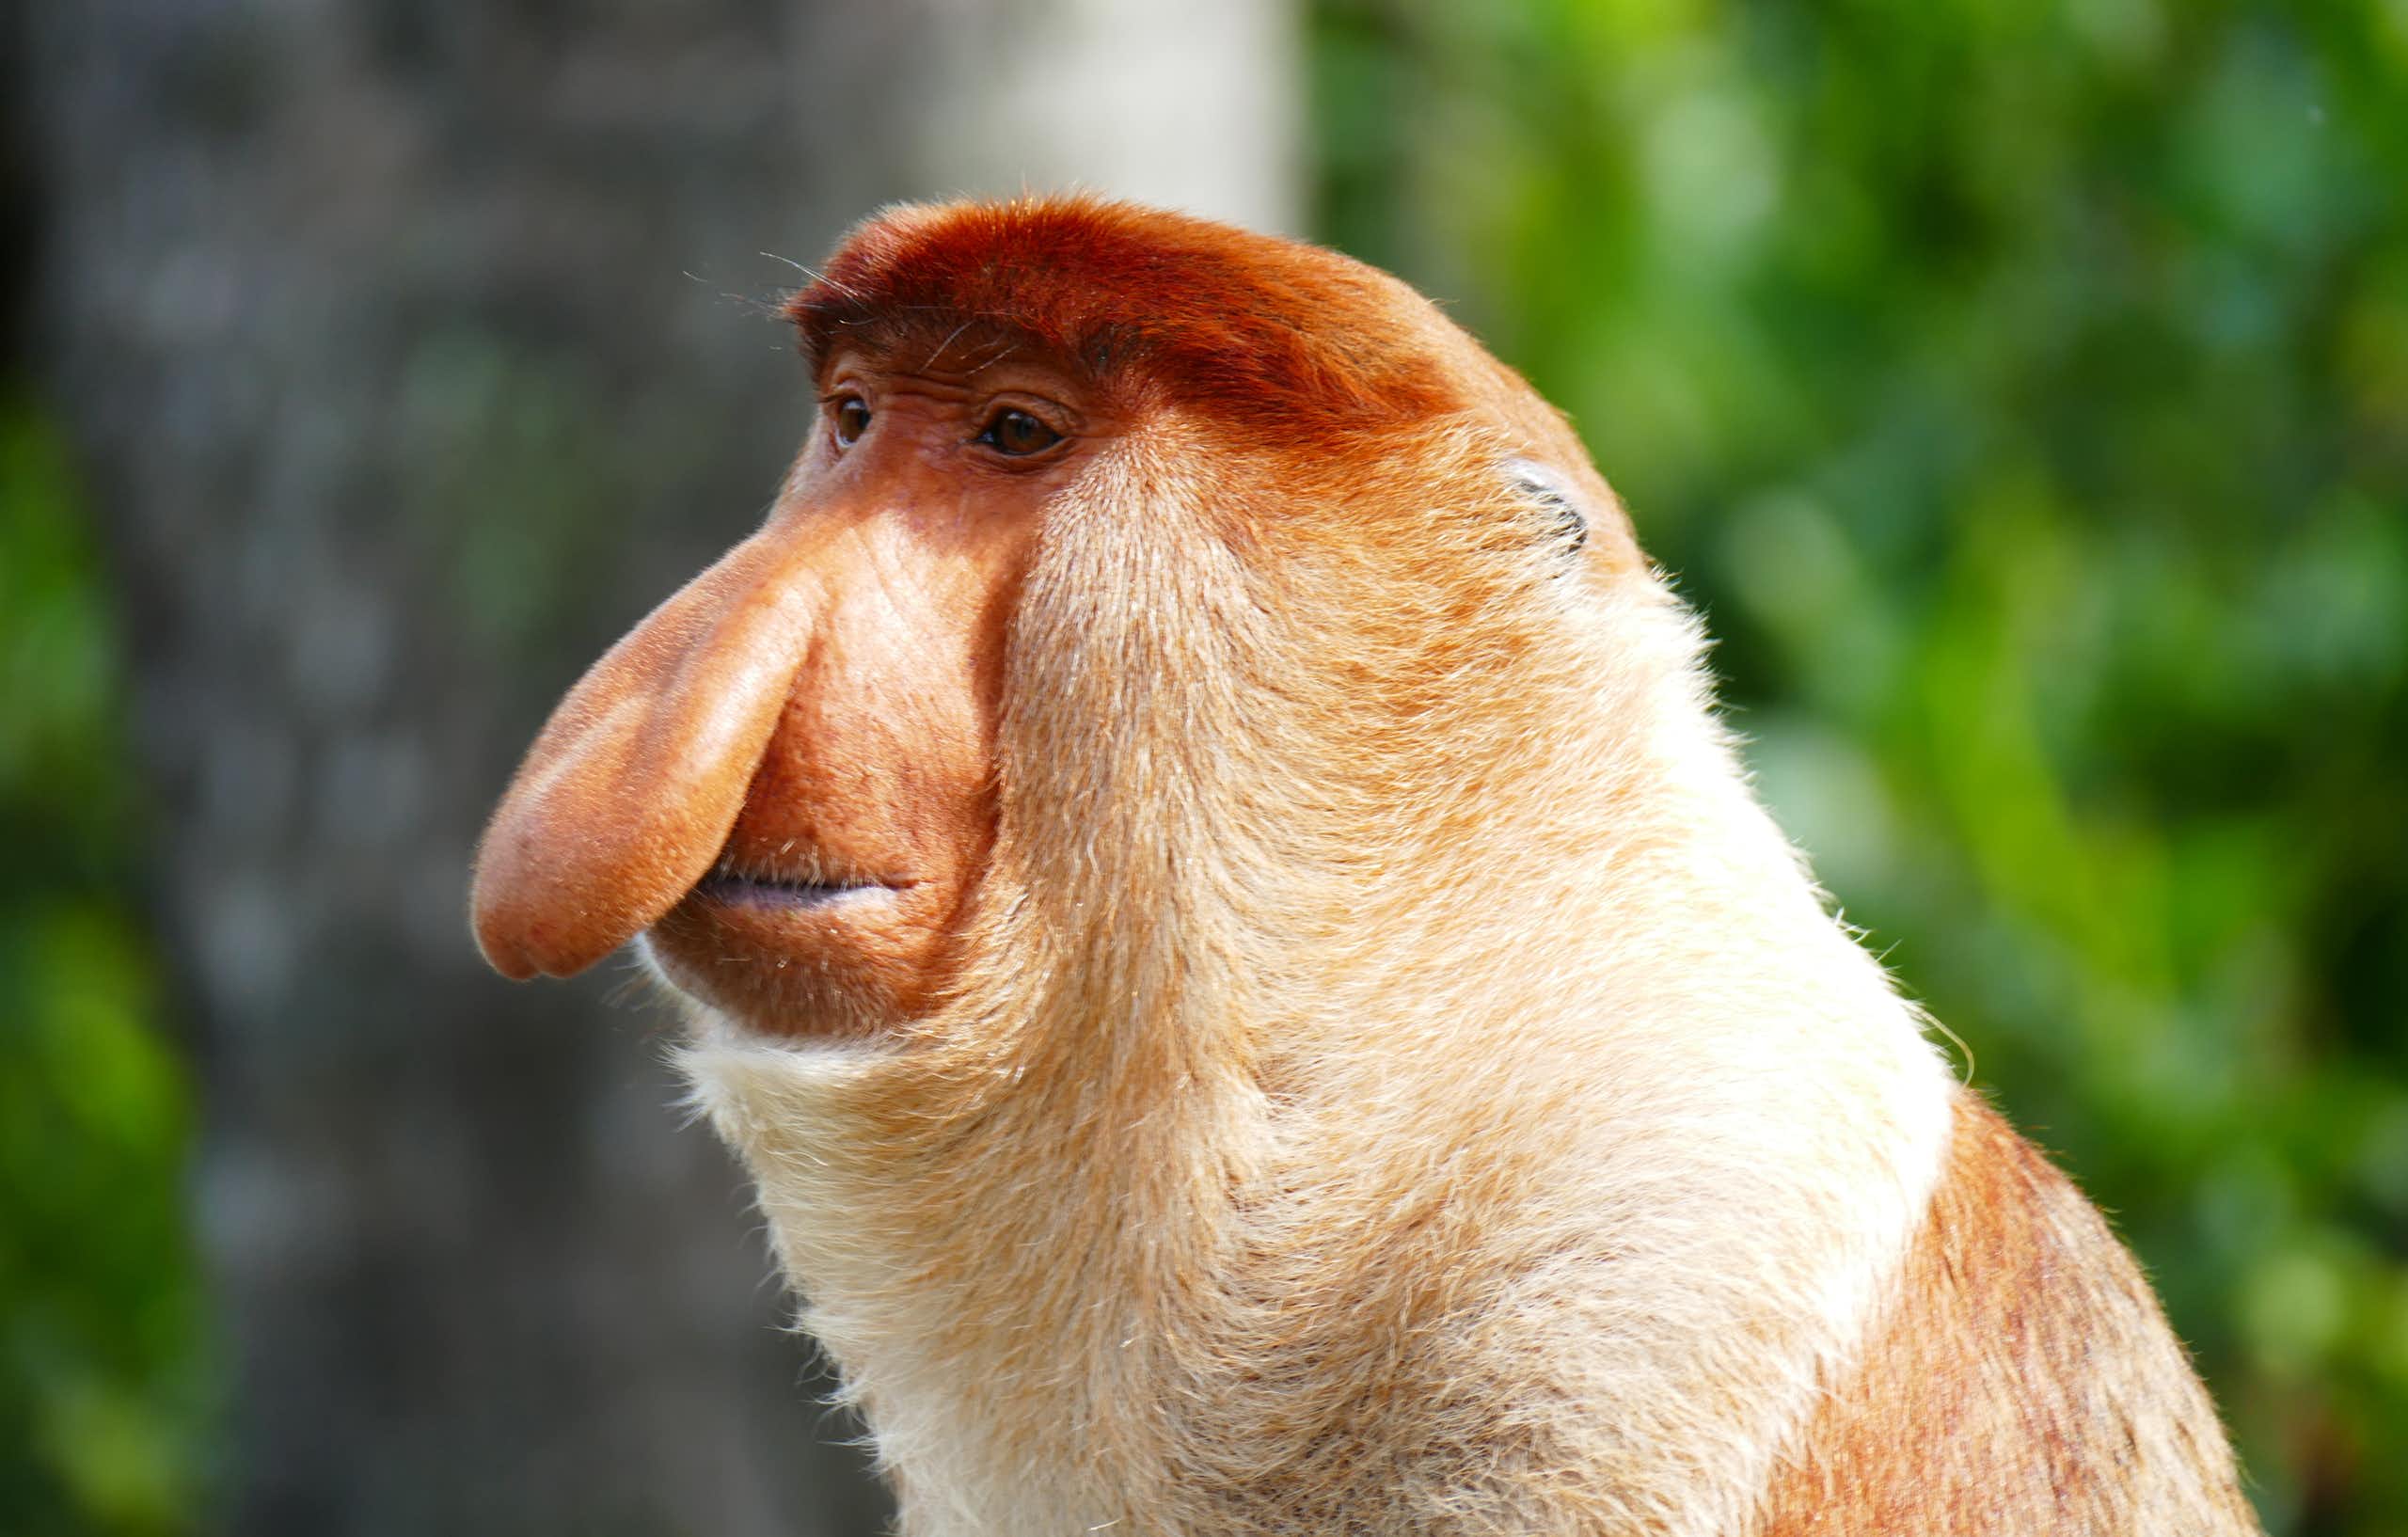 A russet monkey with a long, pendulous nose and a sleepy expression.